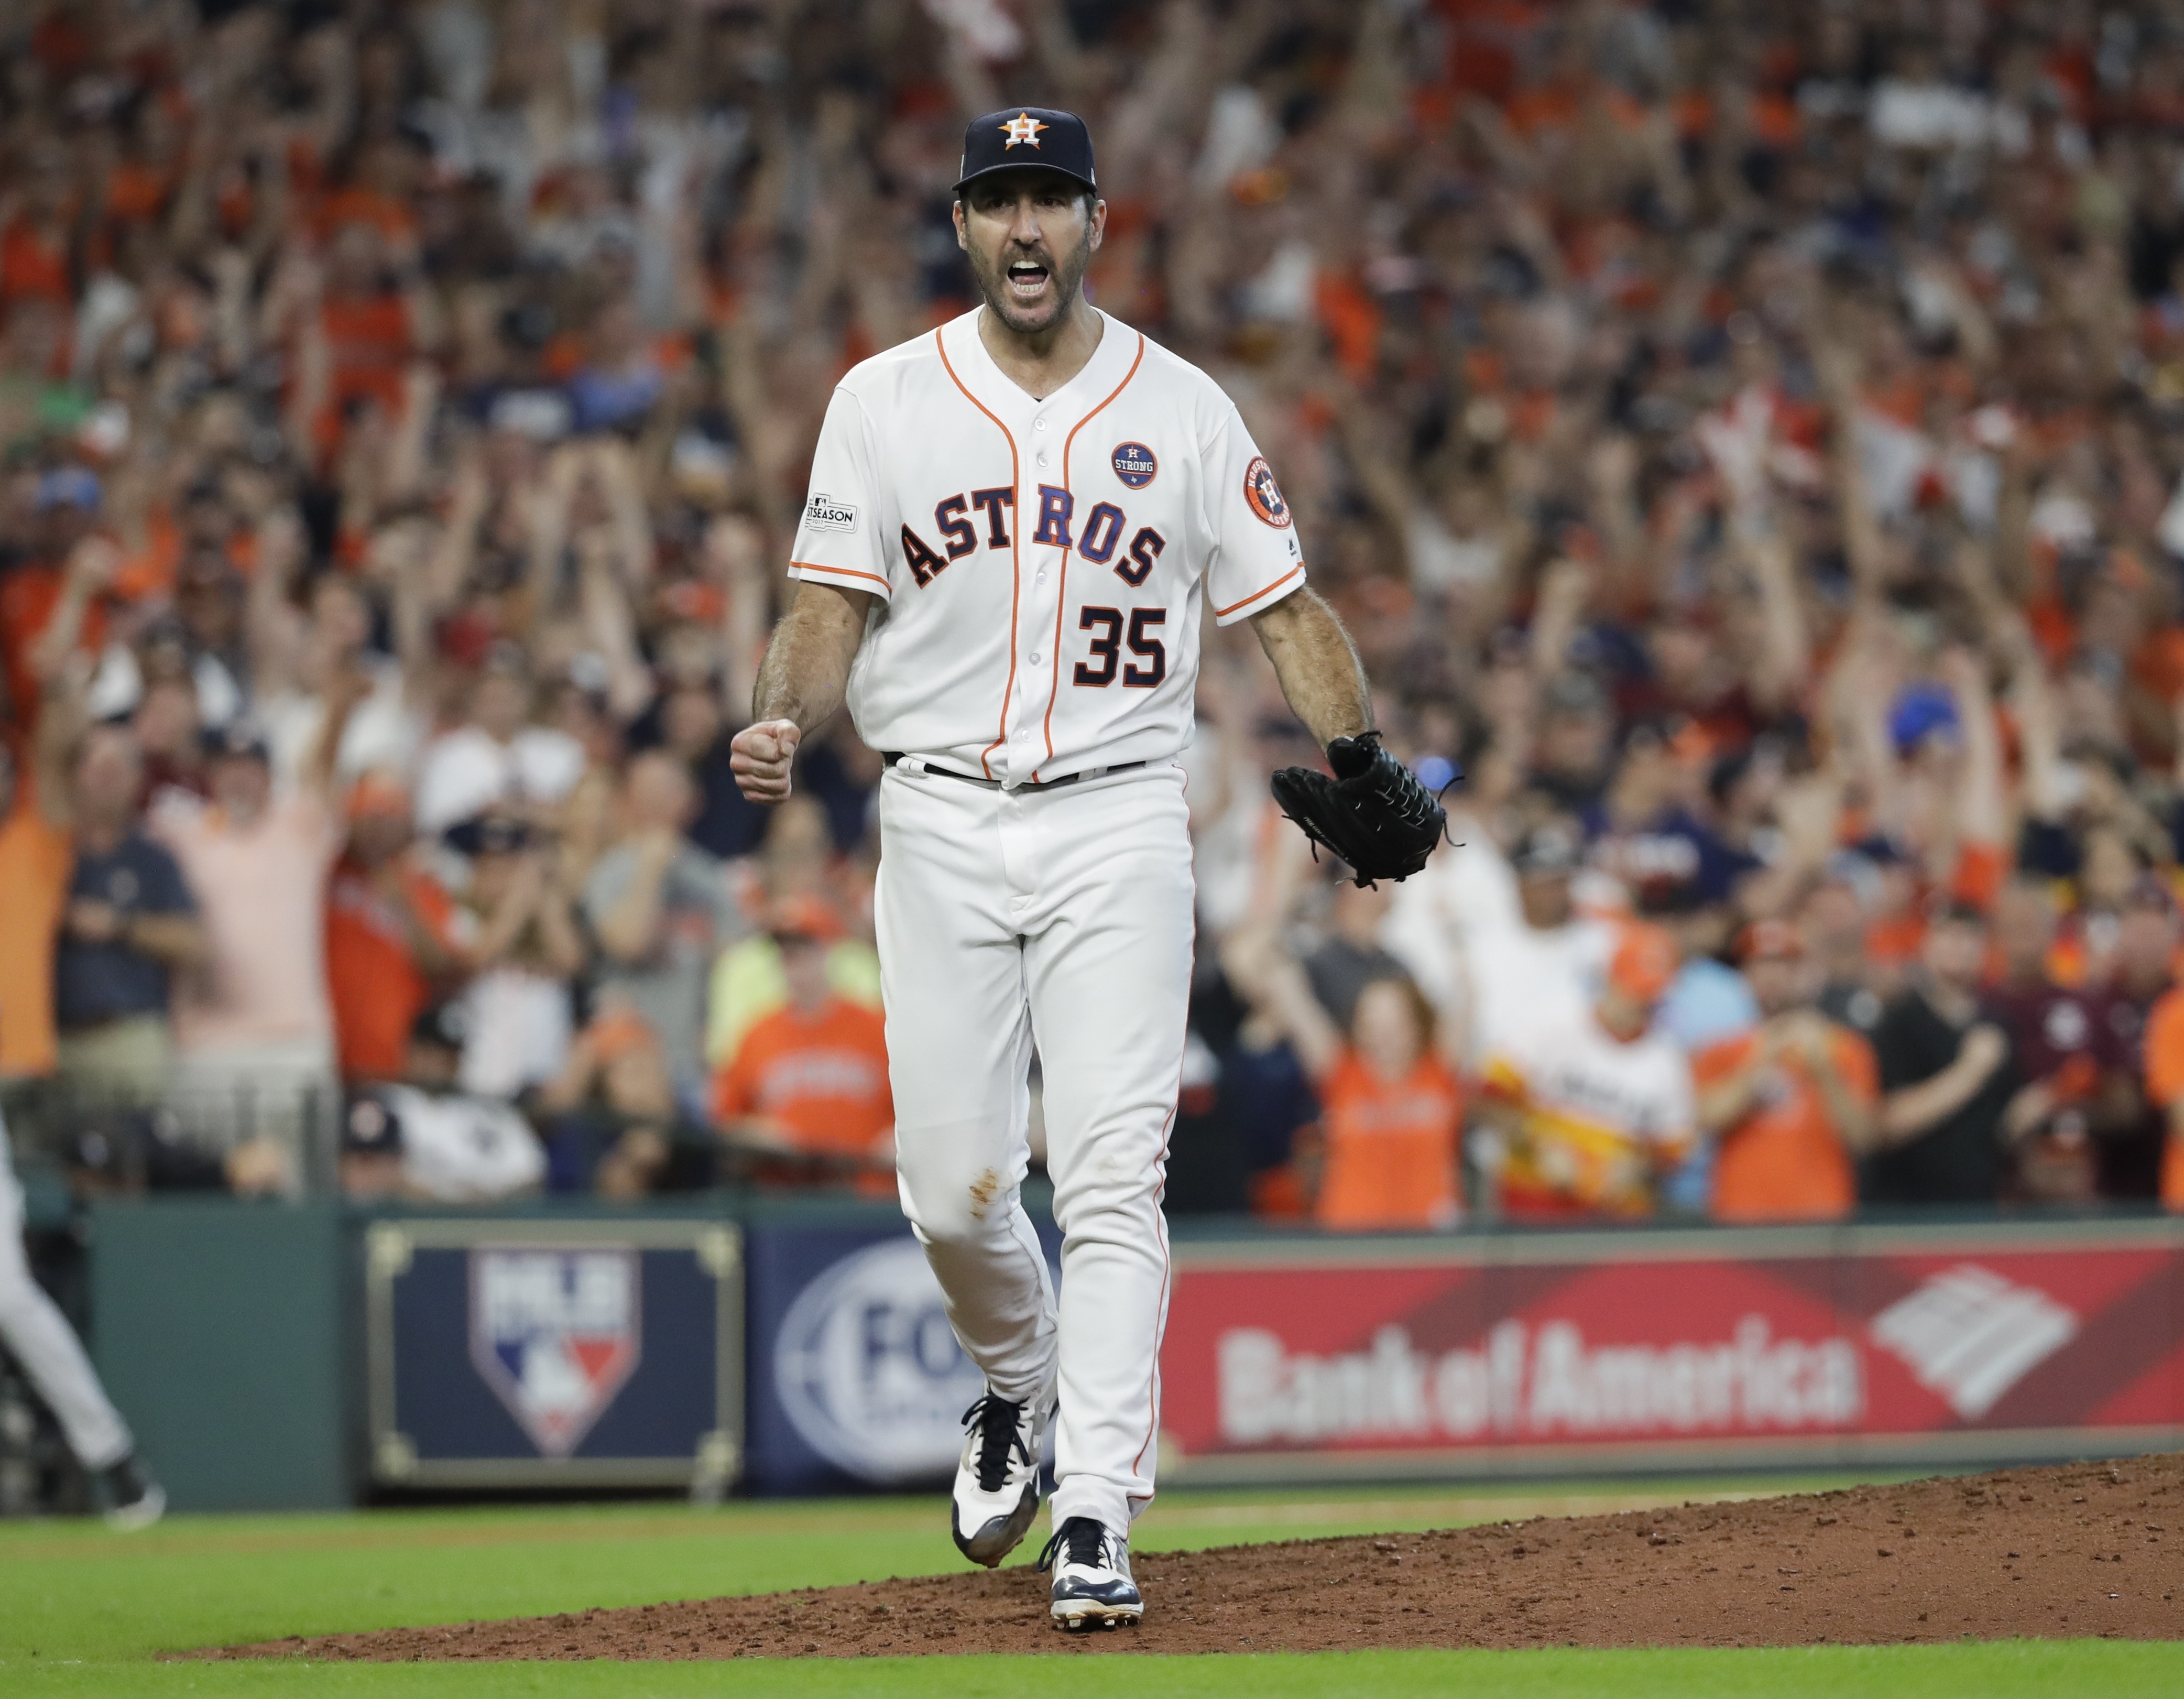 Astros vs. Mariners Game 2 MLB 2022 live stream (10/13) How to